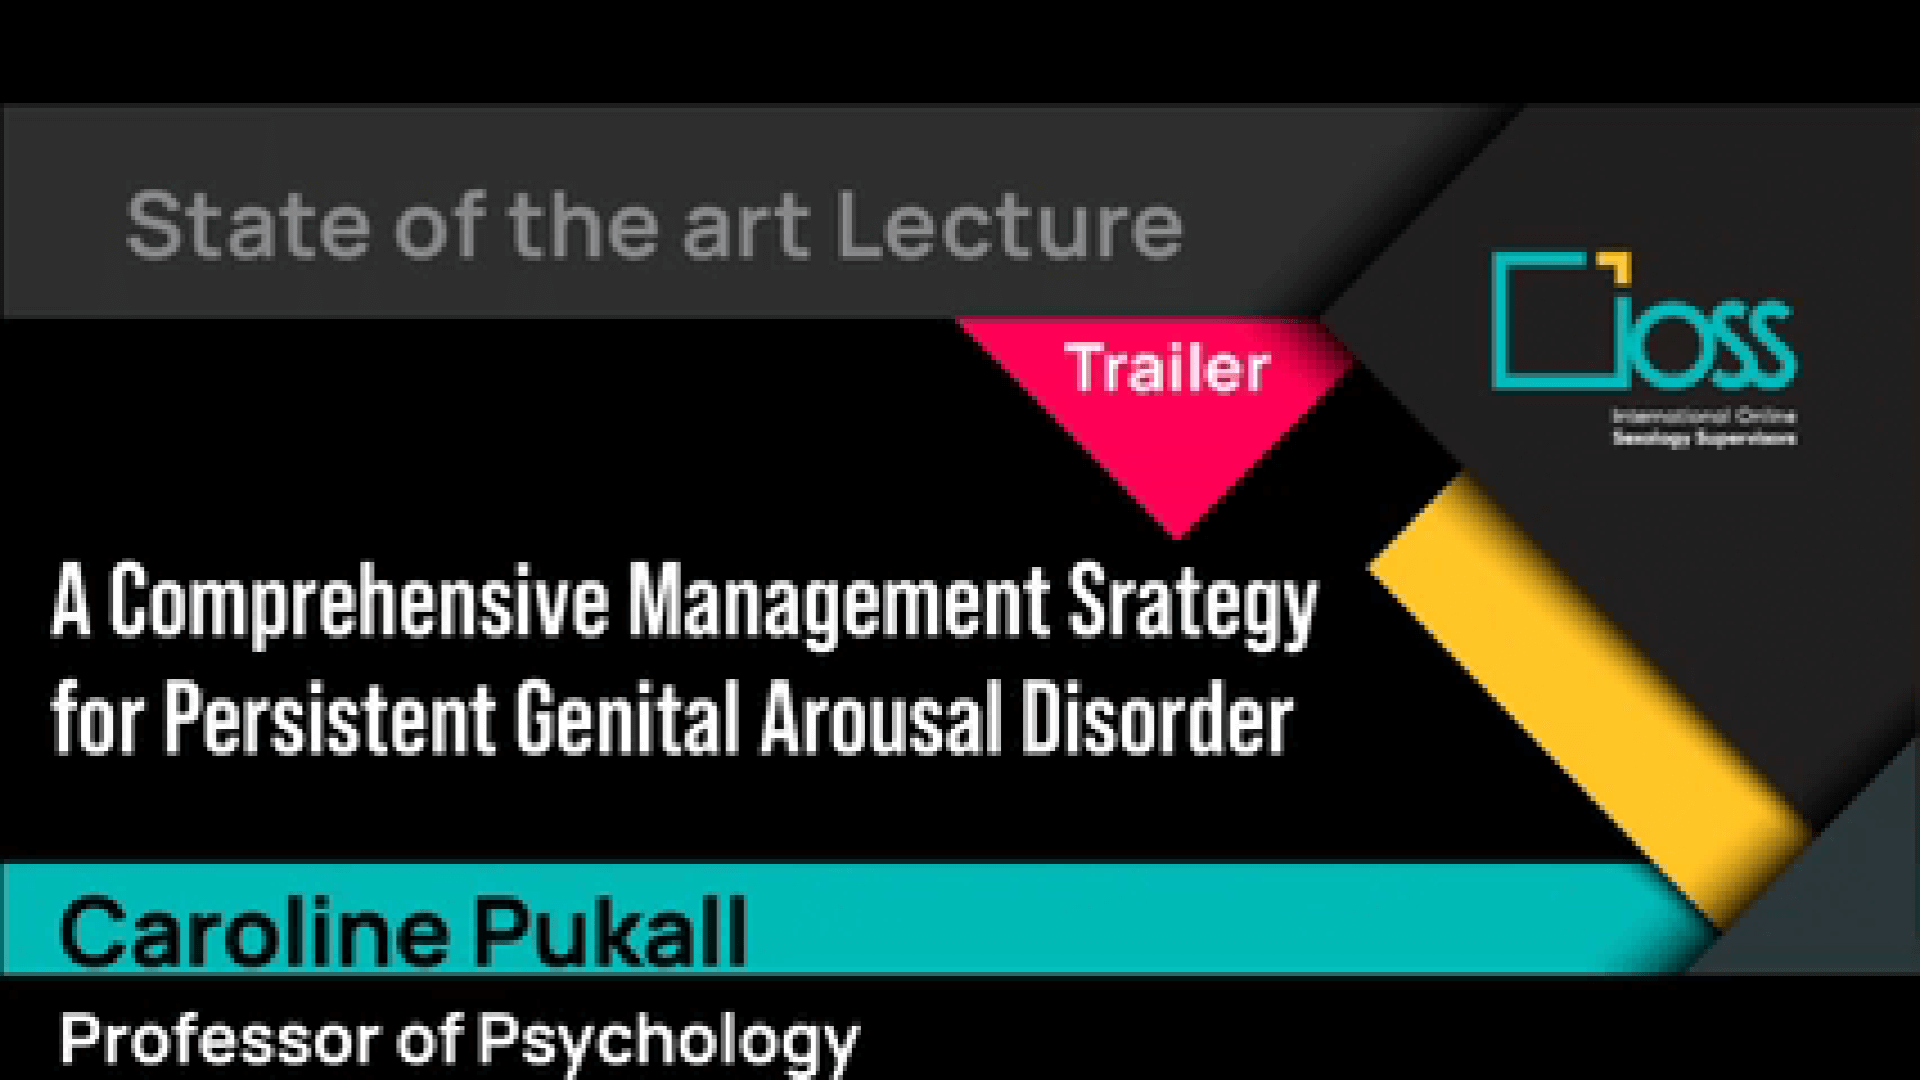 Trailer A Comprehensive Management Strategy for Persistent Genital Arousal Disorder